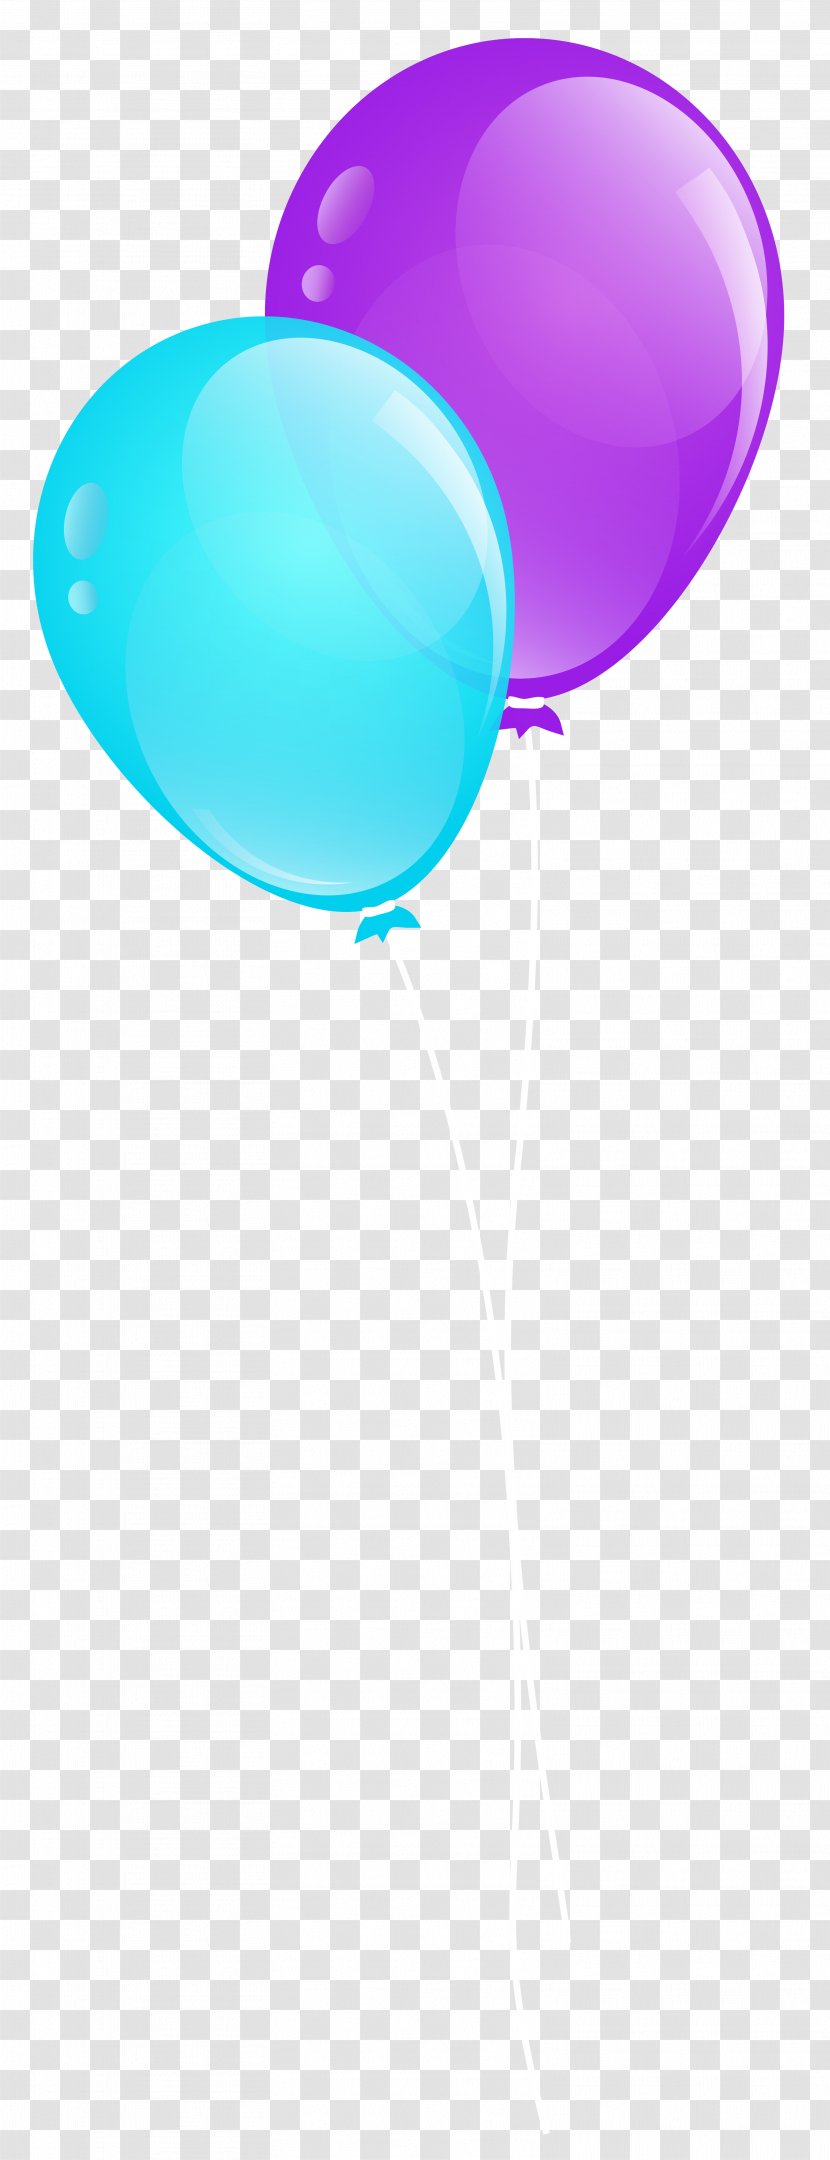 Balloon Purple Stock Photography Clip Art - Aqua - Blue And Balloons Image Transparent PNG